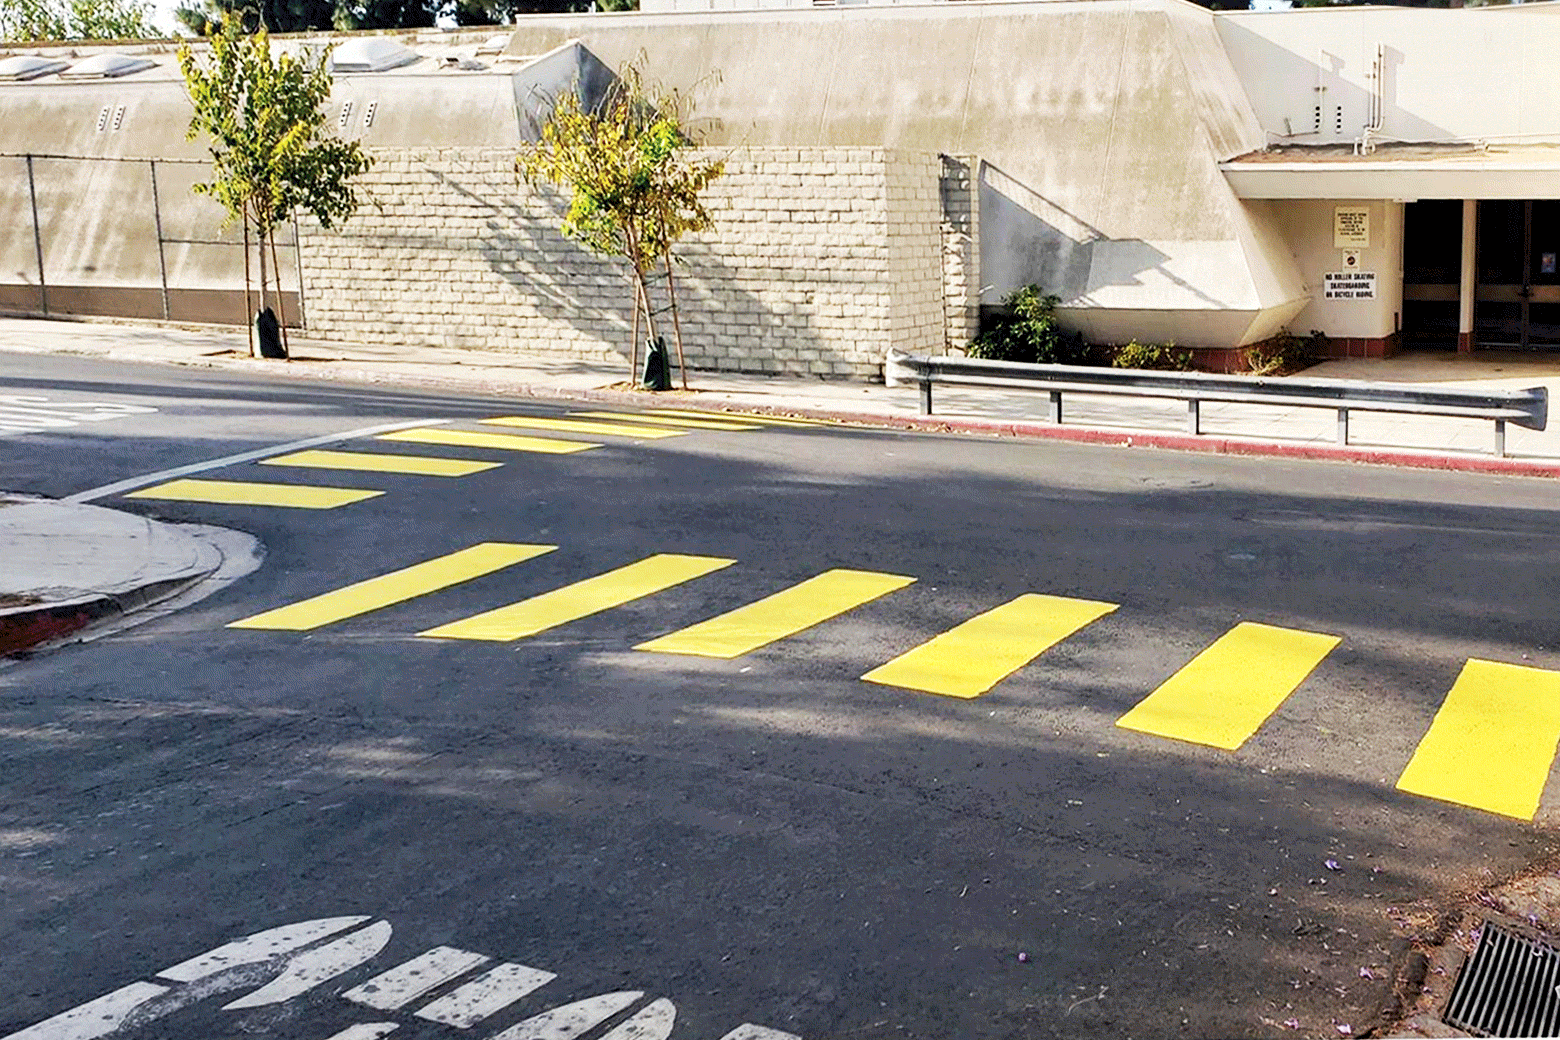 A GIF showing a lot before a crosswalk was painted, and then a picture of the lot with yellow crossing lines.